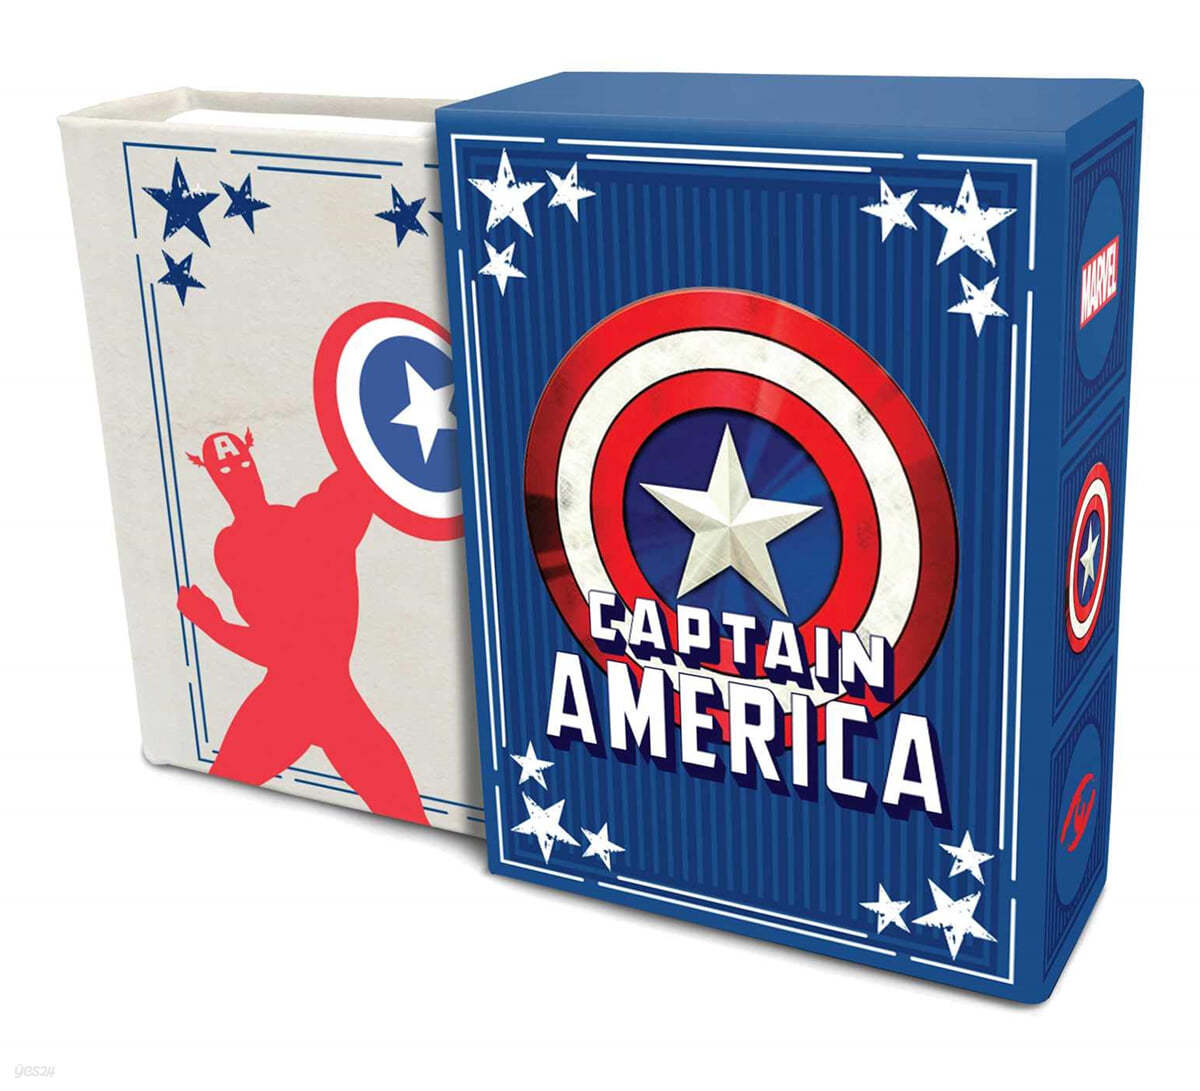 Marvel Comics: Captain America (Tiny Book): Inspirational Quotes from the First Avenger (Fits in the Palm of Your Hand, Stocking Stuffer, Novelty Geek